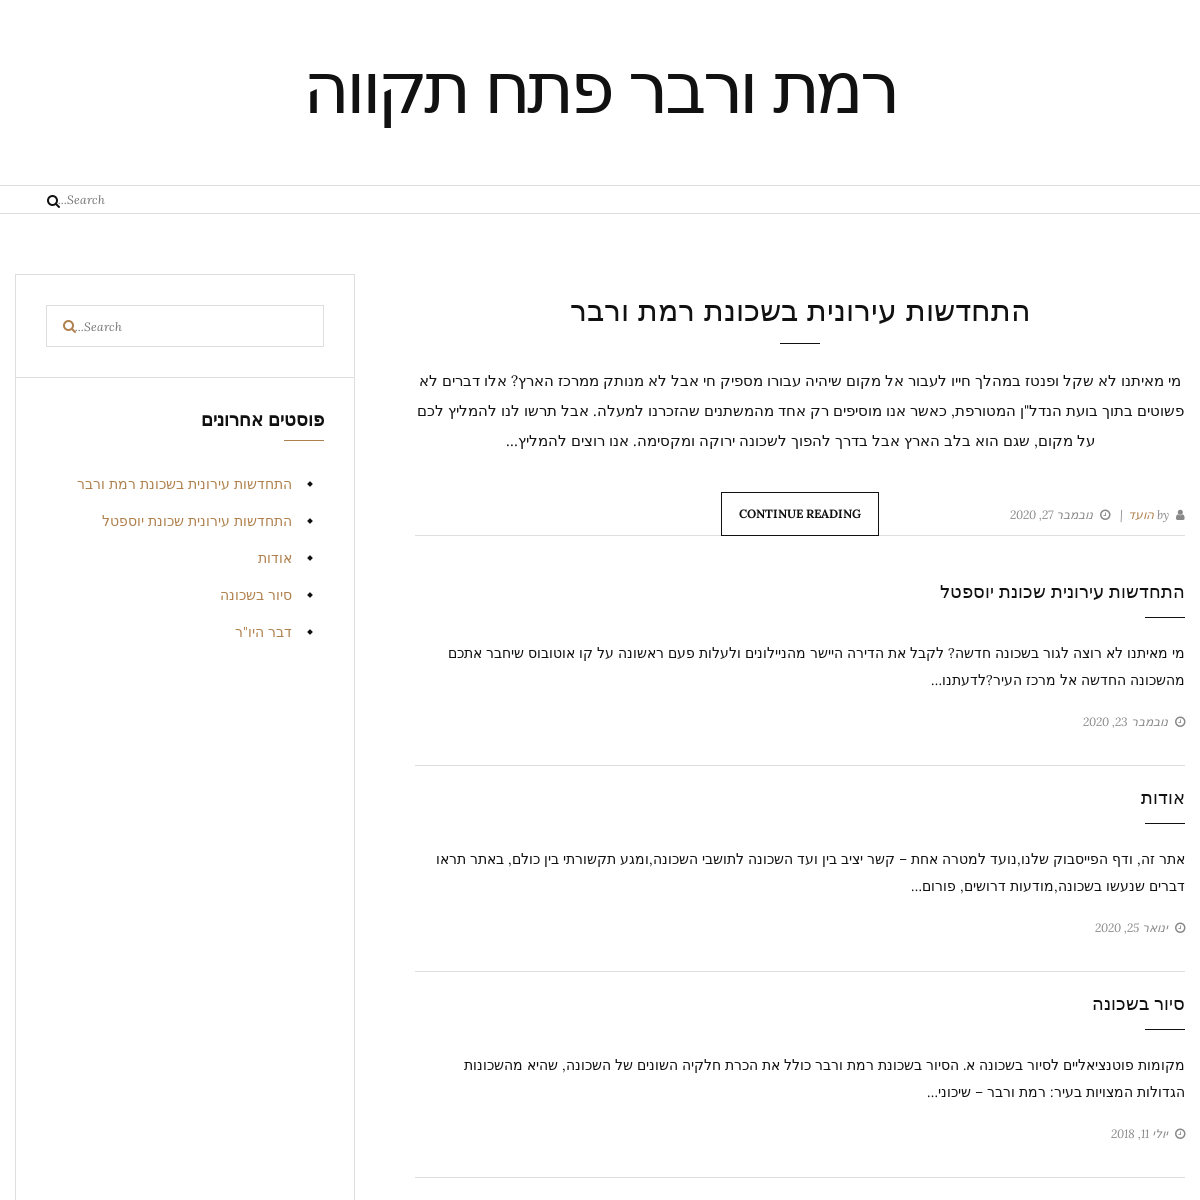 A complete backup of ramat-verber.co.il